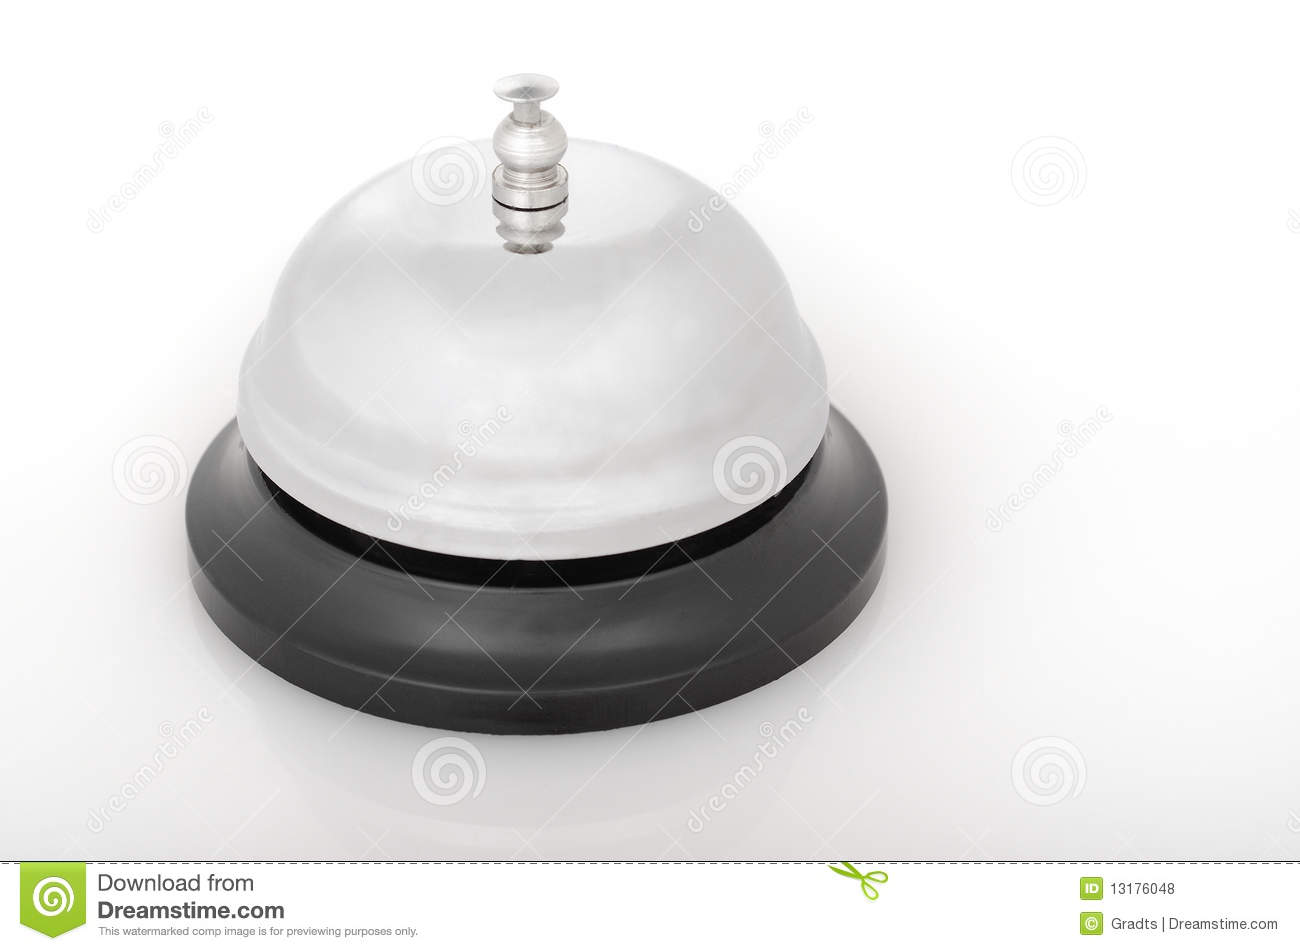 Call Bell Royalty Free Stock Photos   Image  13176048